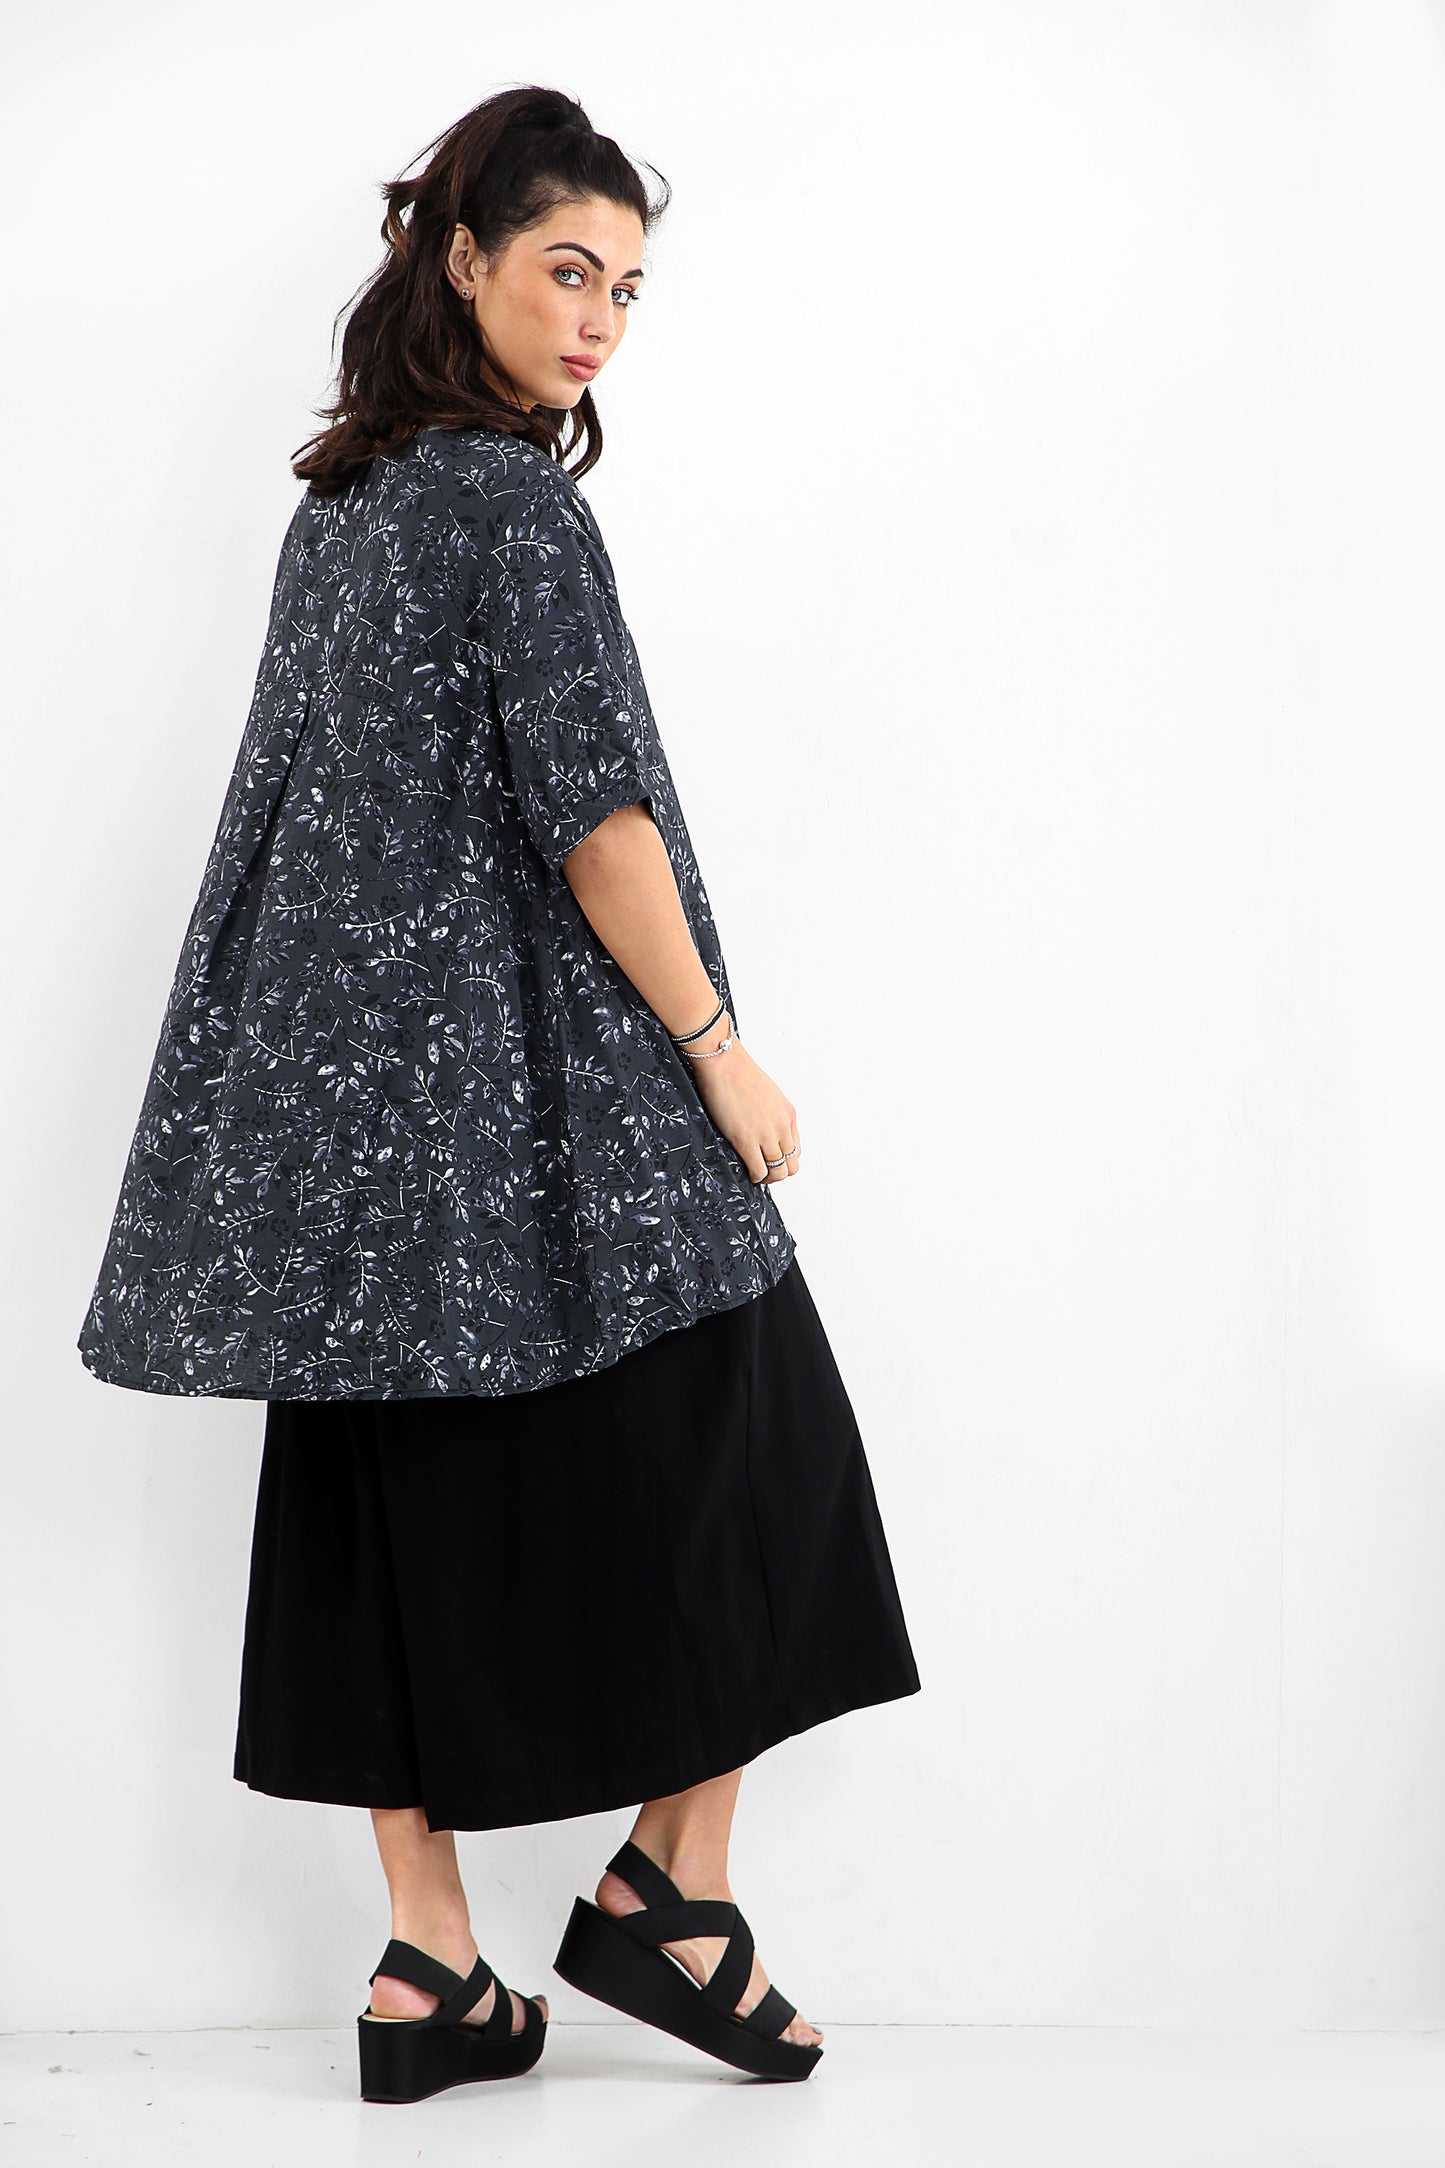 Blouse with floral patterns